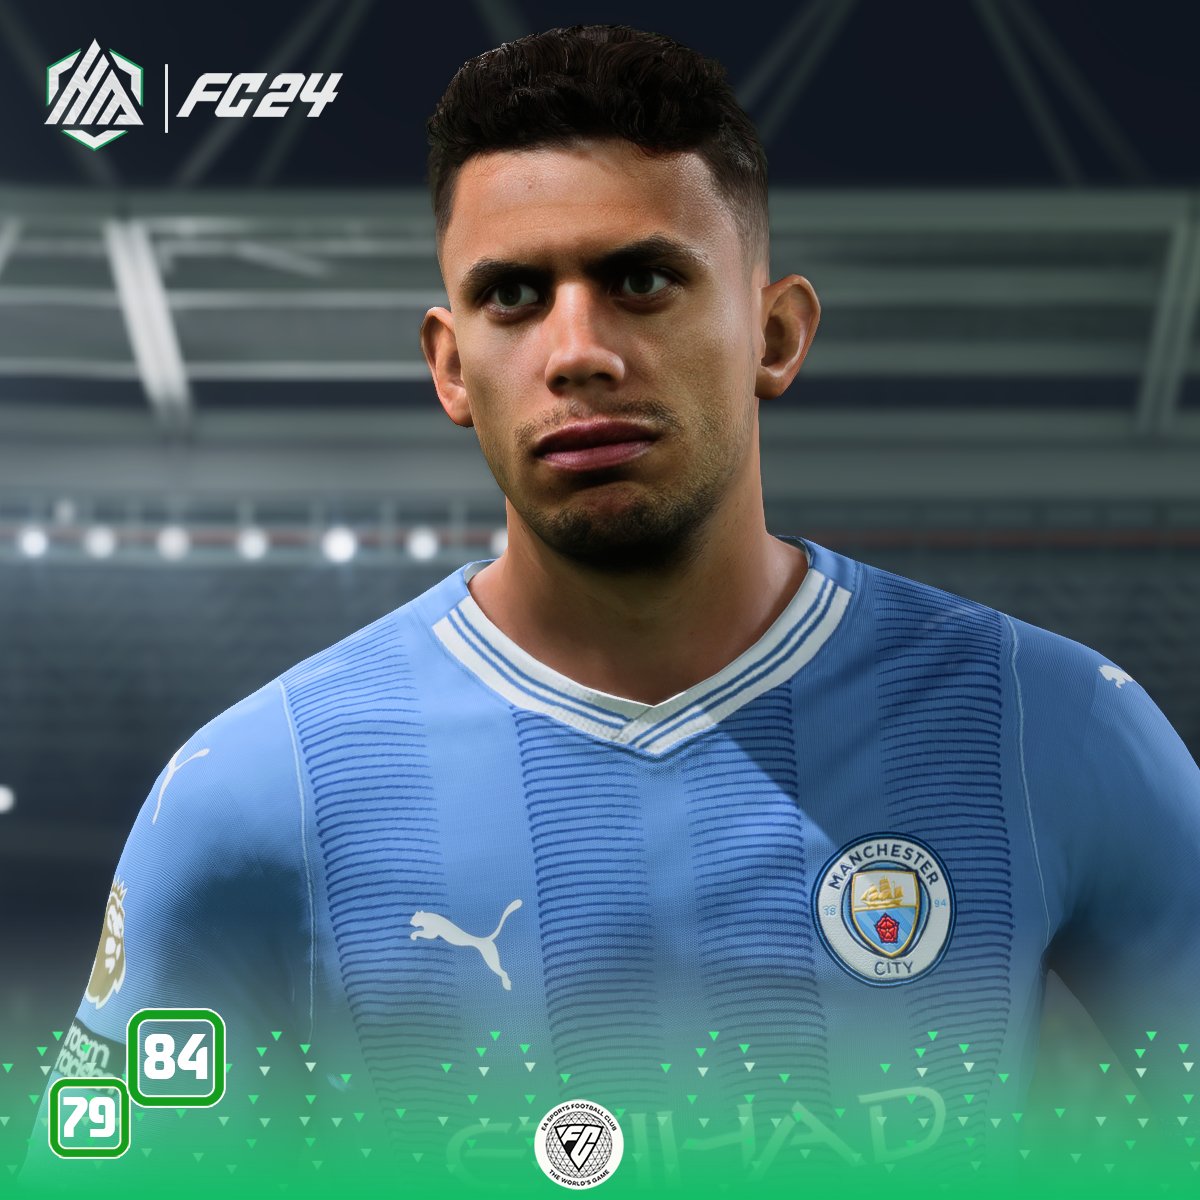 🌟Maestro in midfield with his talent  !!  24 years with Good Potential in #FC24🤩 

Matheus Nunes #ManchesterCity 's Gem 💎 

Release : Today ✅🤙 

#EAFC24 #PremierLeague #Citizens #ManchesterDerbyWeek #ManchesterisBlue